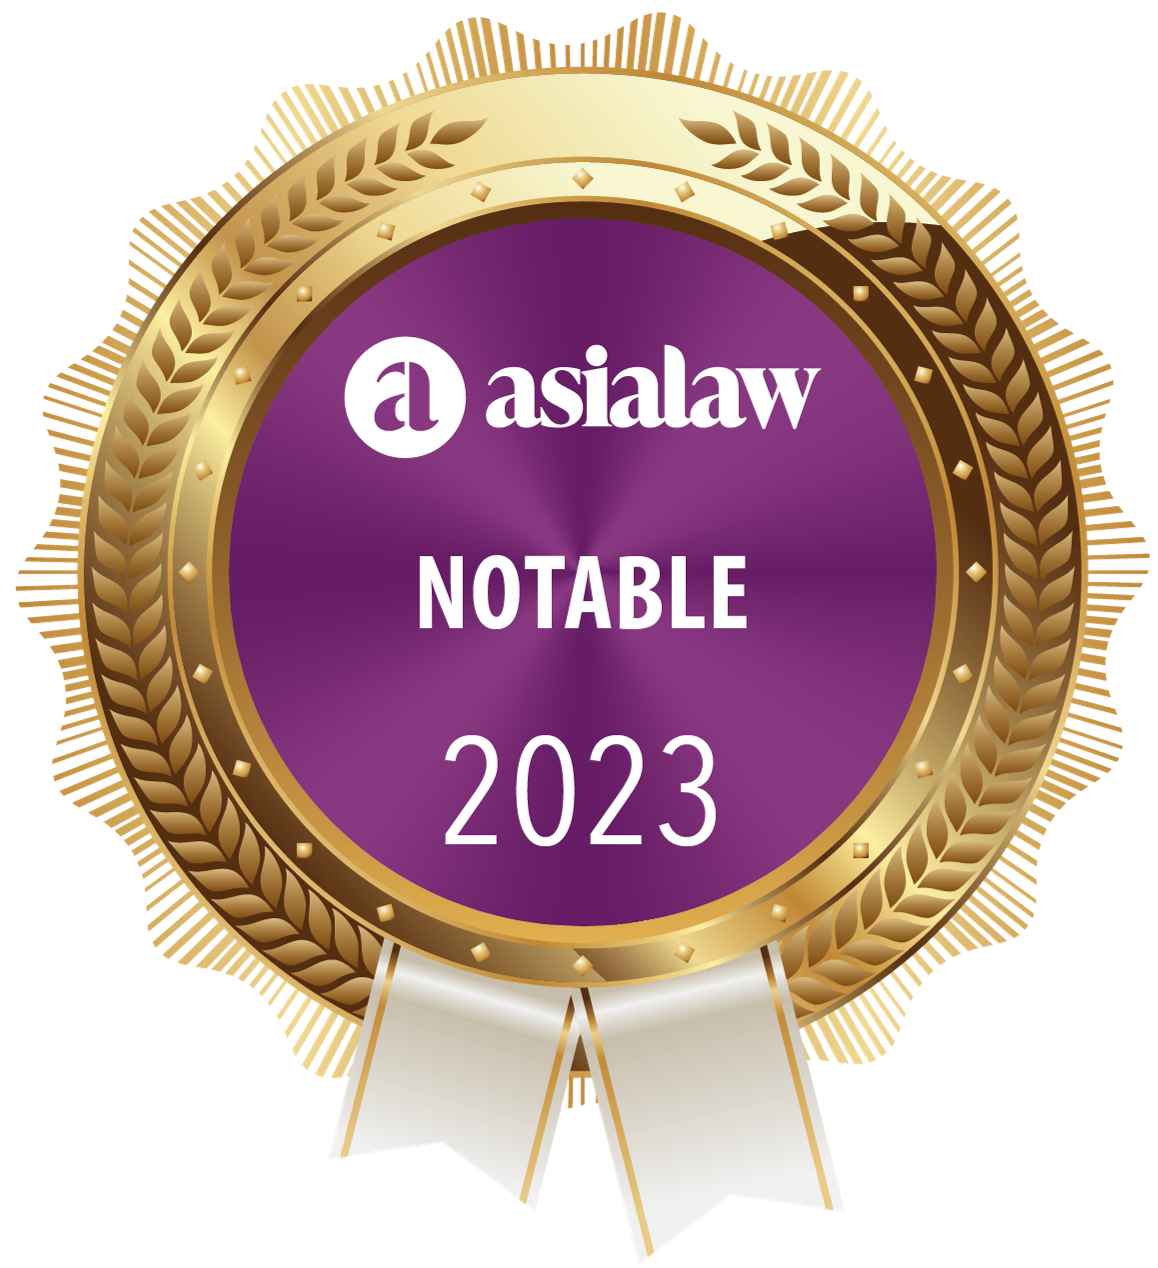 Recognised by asialaw as a 'Notable' firm in Corporate and M&A, Dispute Resolution, Regulatory, 2022/23